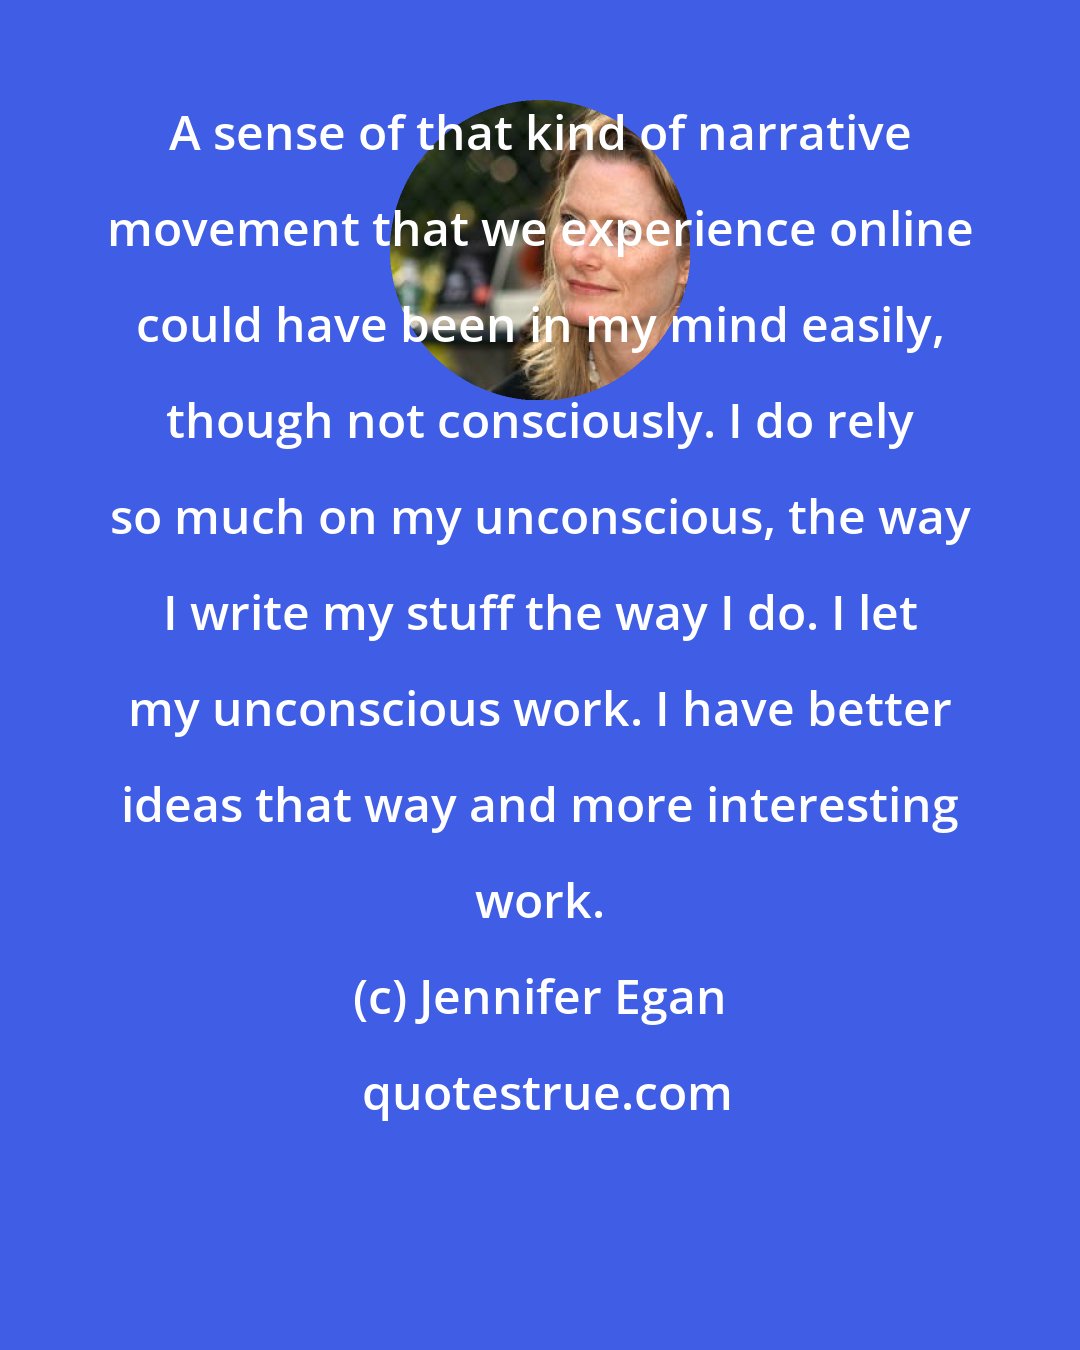 Jennifer Egan: A sense of that kind of narrative movement that we experience online could have been in my mind easily, though not consciously. I do rely so much on my unconscious, the way I write my stuff the way I do. I let my unconscious work. I have better ideas that way and more interesting work.